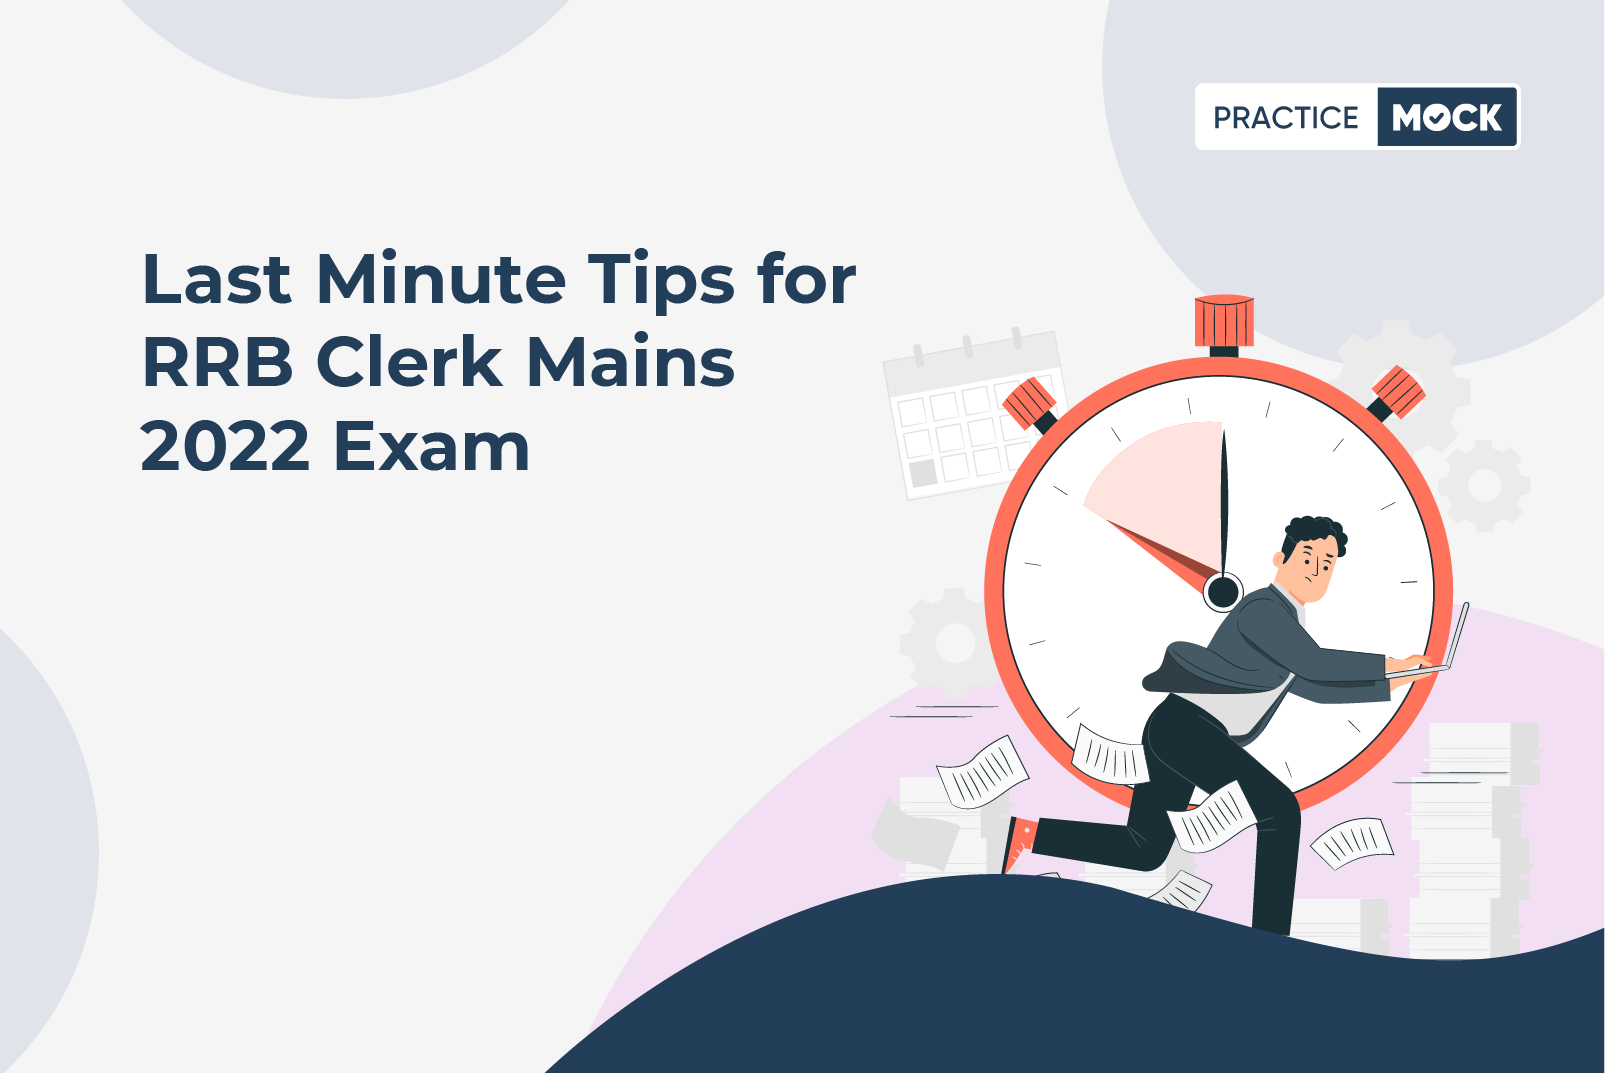 Last Minute Tips for RRB Clerk Mains 2022 Exam